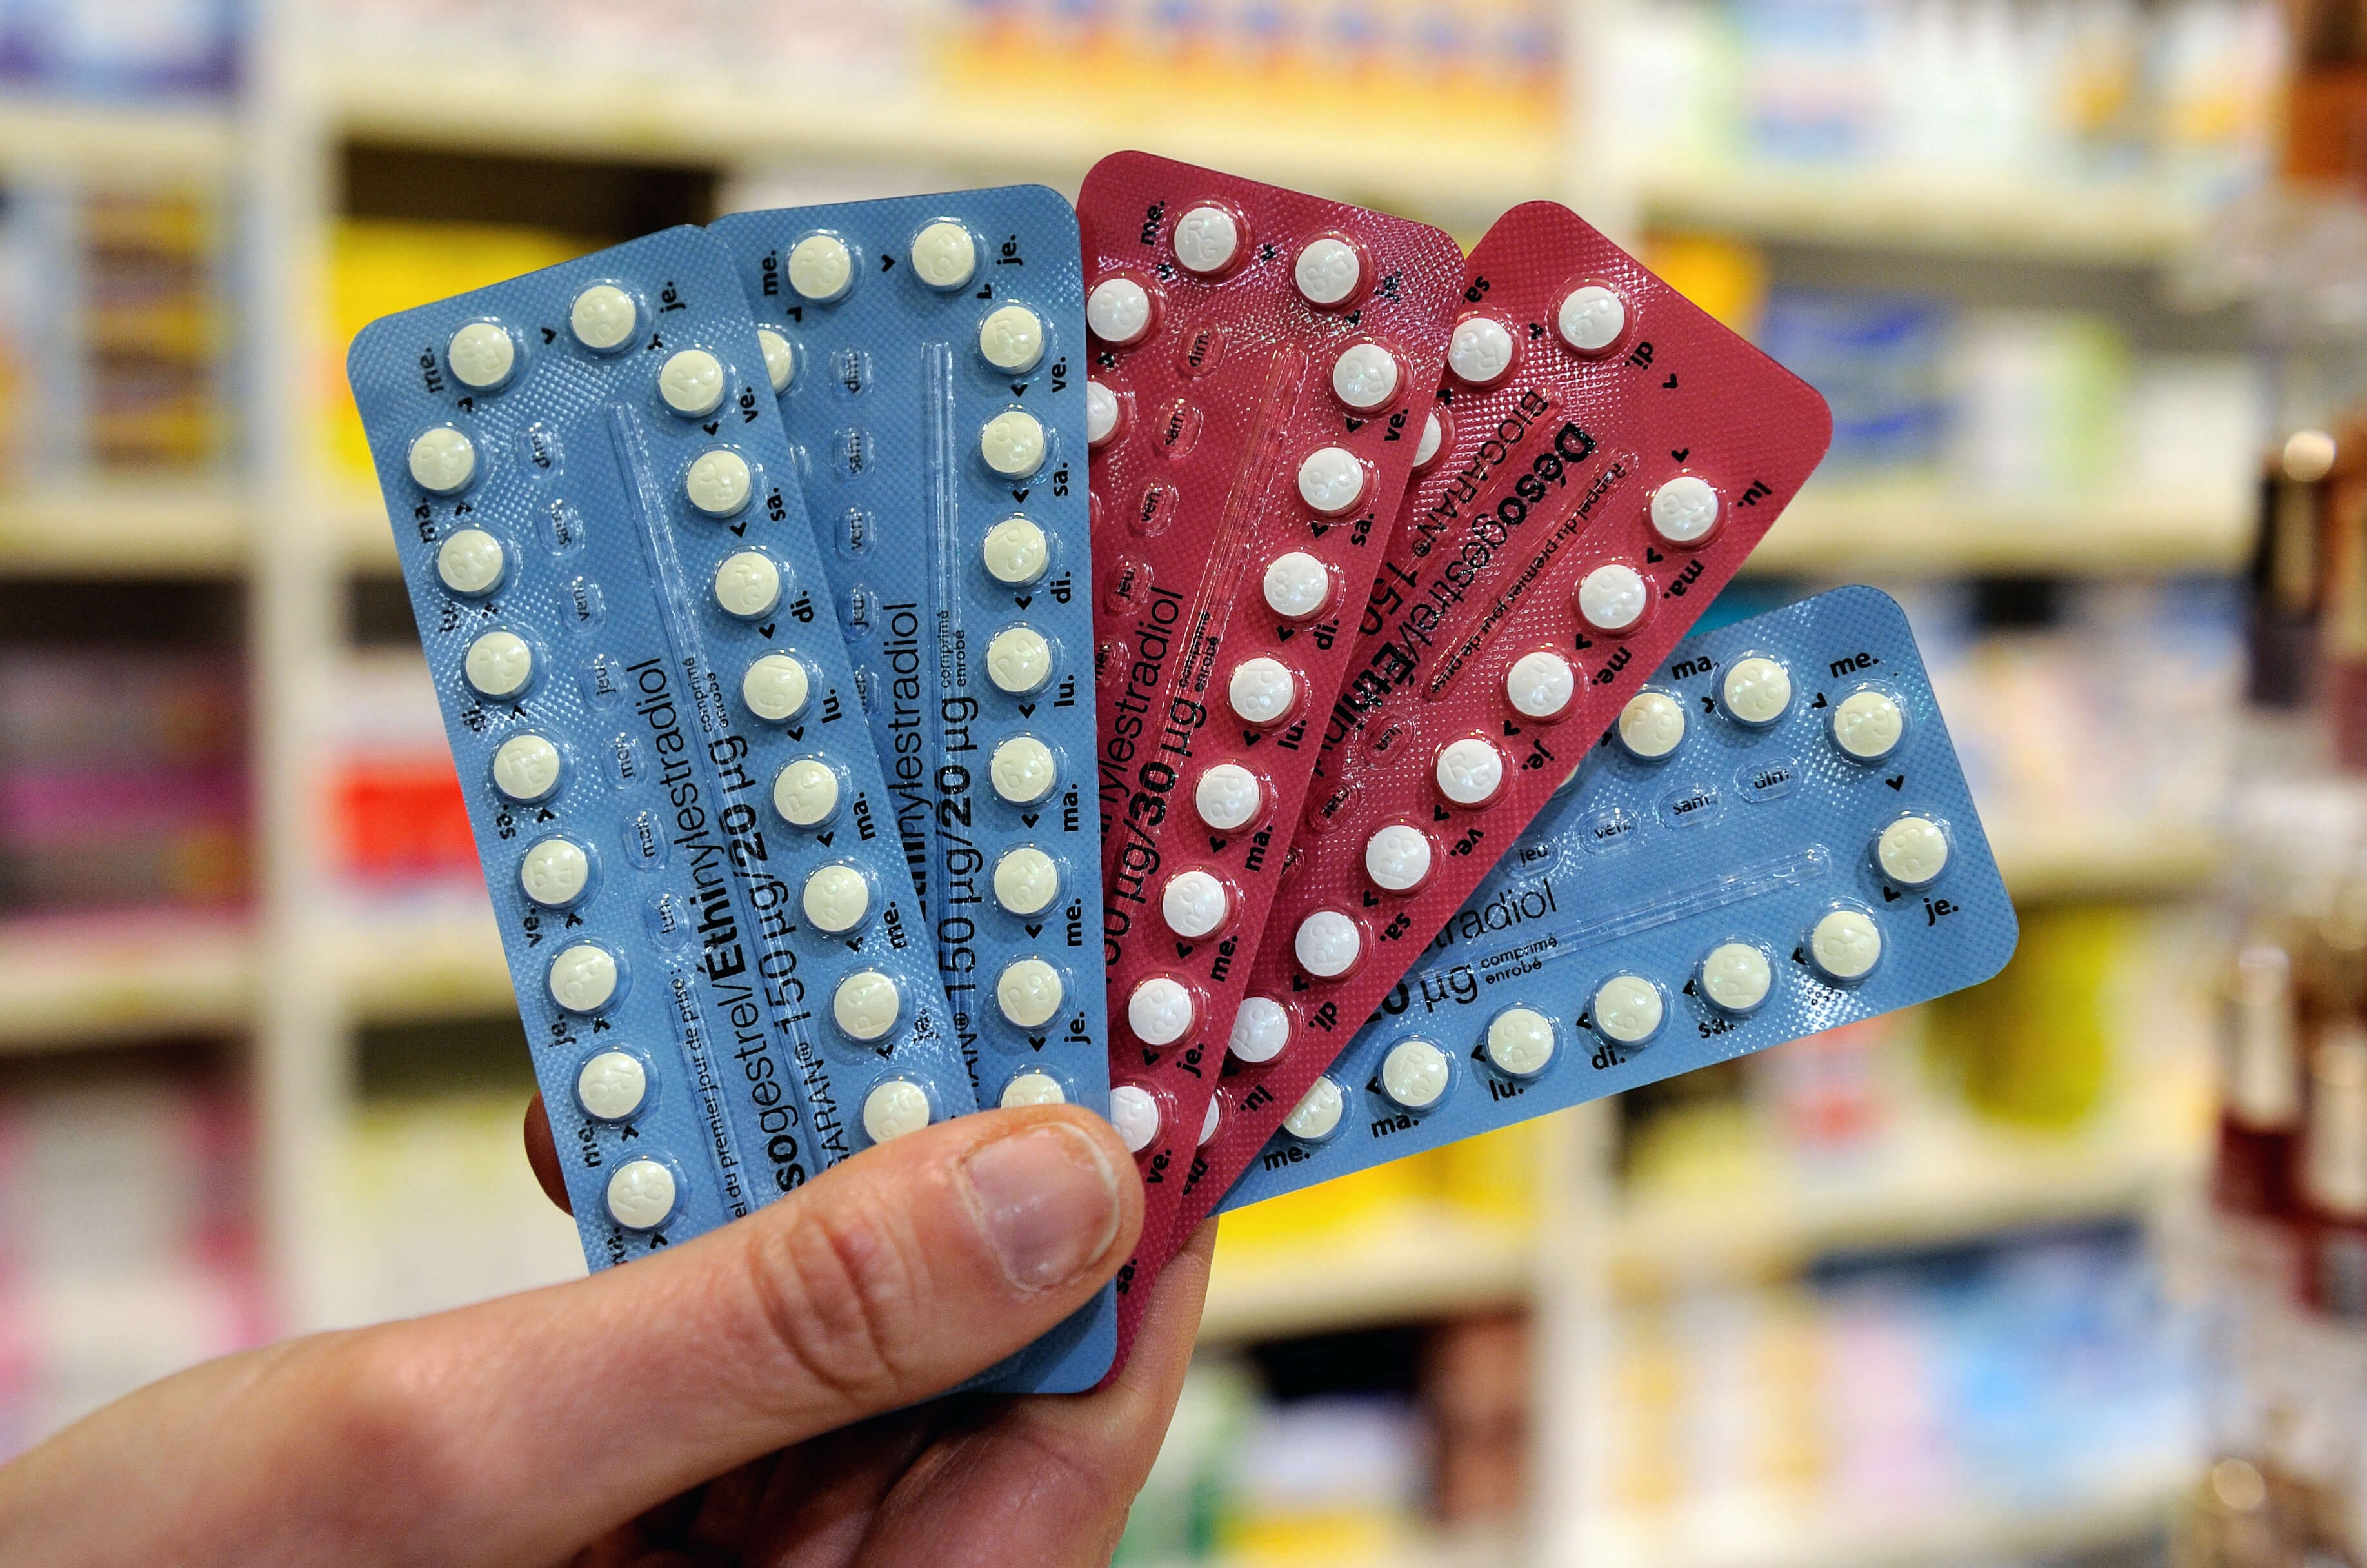 How can I access birth control for students overseas?